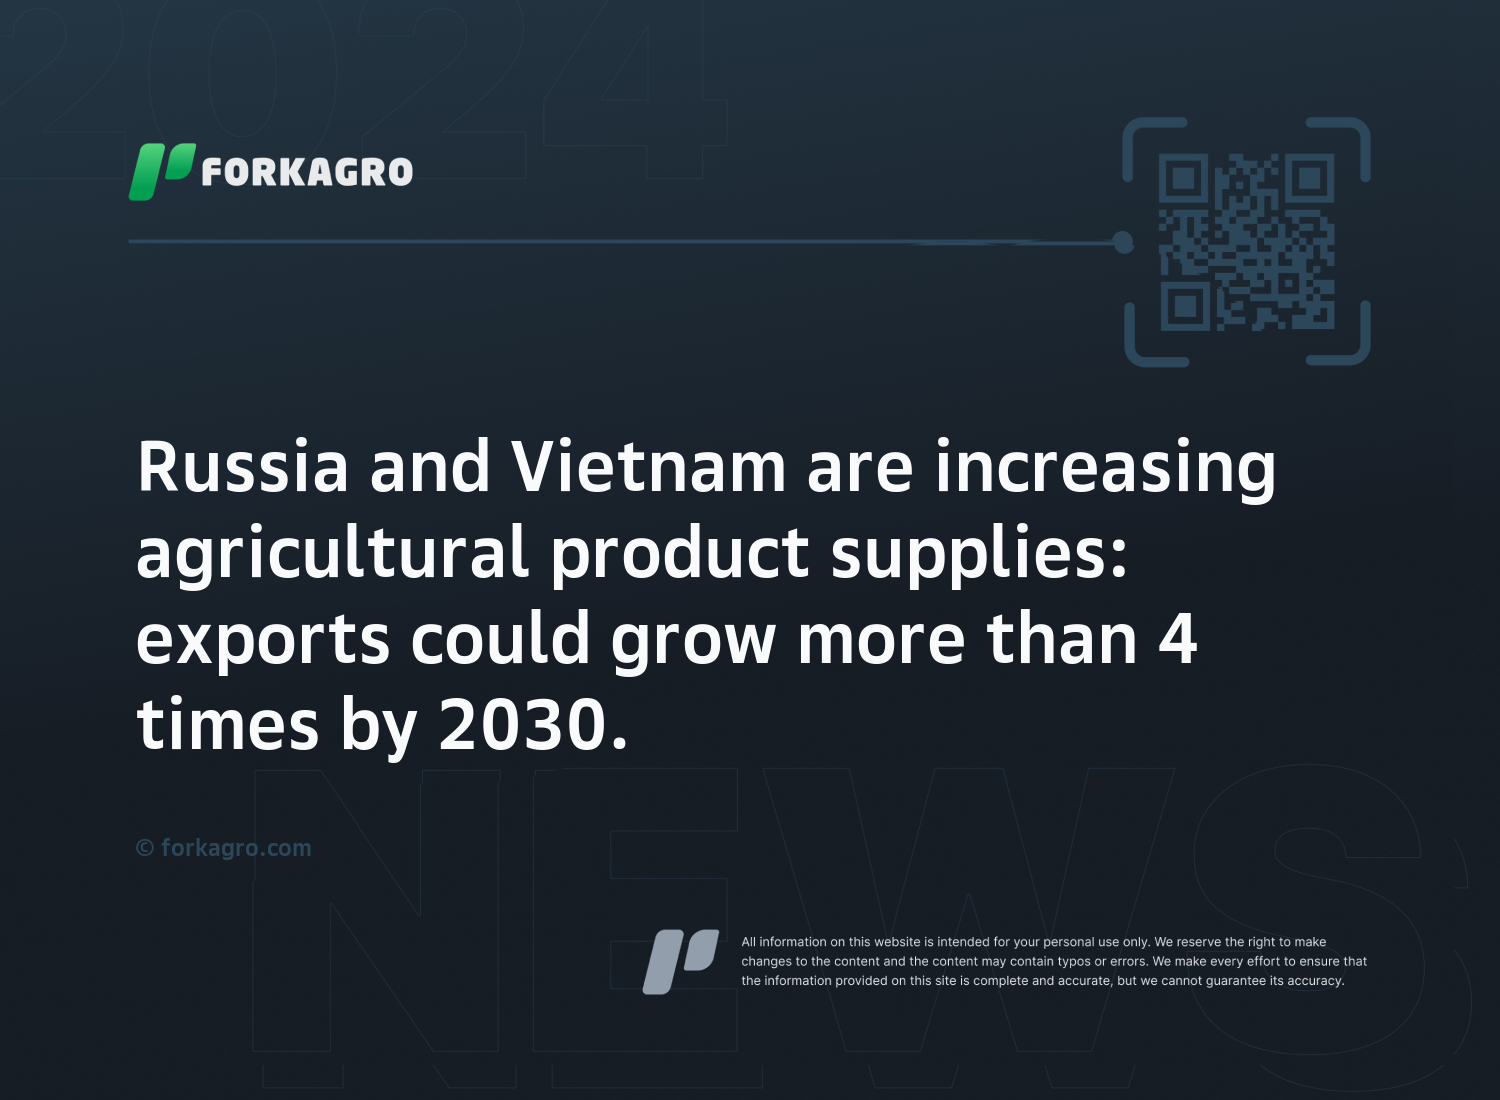 Russia and Vietnam are increasing agricultural product supplies: exports could grow more than 4 times by 2030.